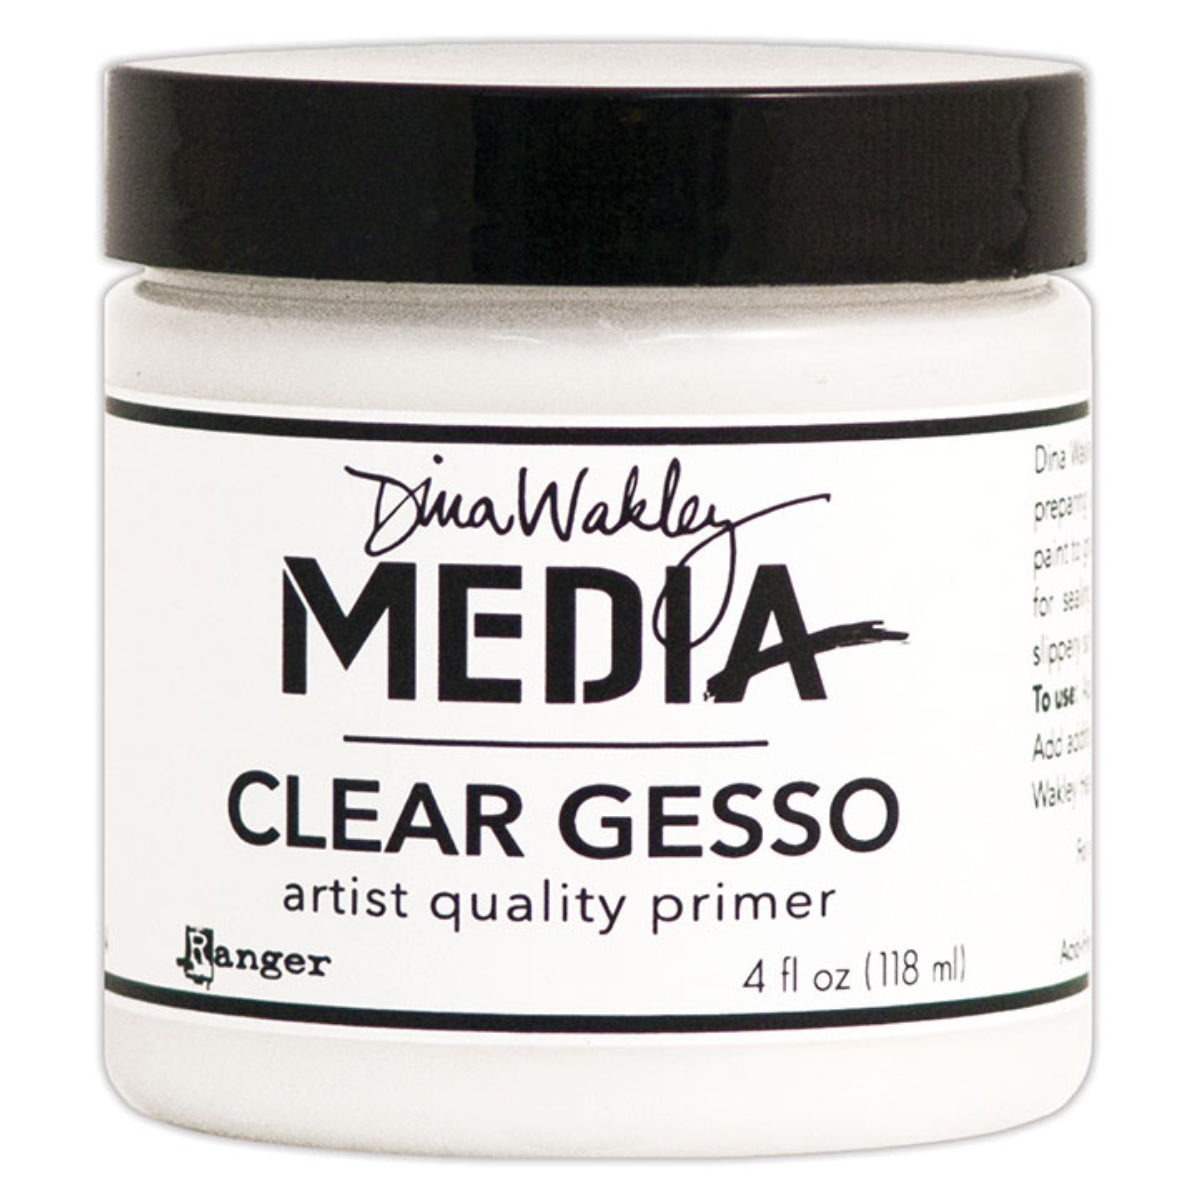 Clear Gesso - Dina Wakley MEdia ... artist quality primer for preparing surfaces for painting, mixed media and visual arts. 1 (one) jar, 4 fl oz (118ml). Made by Ranger.   Ranger's Dina Wakley MEdia's artist quality Clear Gesso (also called grounds or primer) is a thick consistency, made of an acrylic base that is water soluble when wet. This quick drying gesso dries flexible and transparent with a toothy finish. 